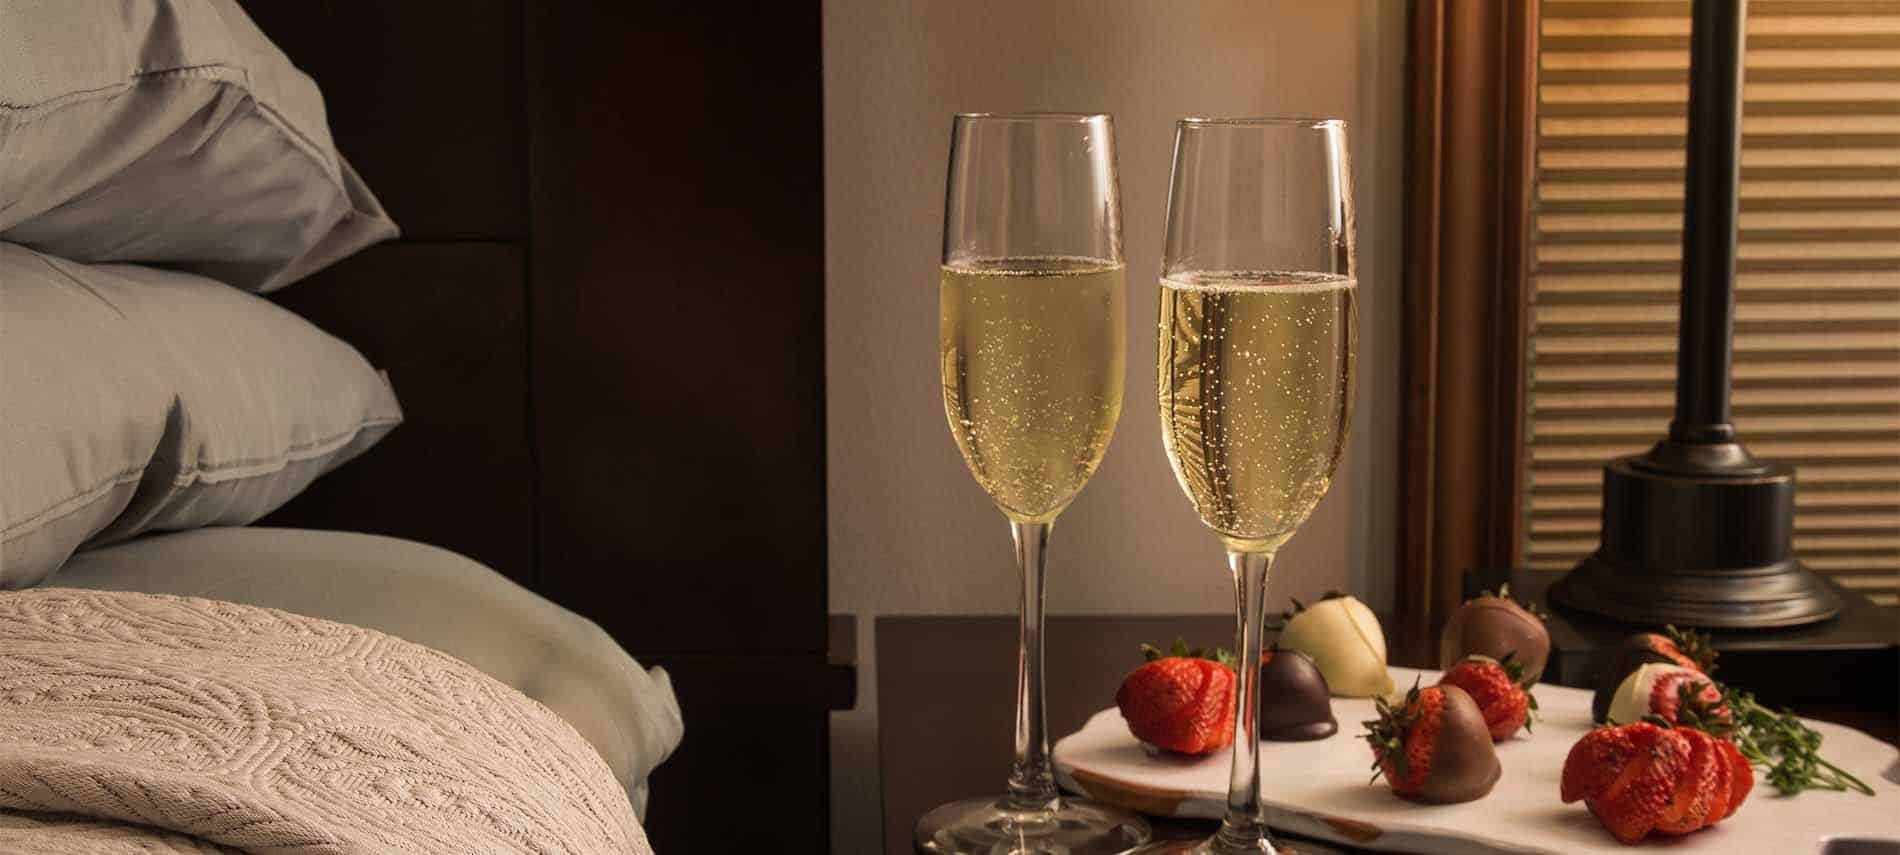 Two champagne glasses with gently bubbling liquid inside, stand next to chocolate covered strawberries on a bedside table.